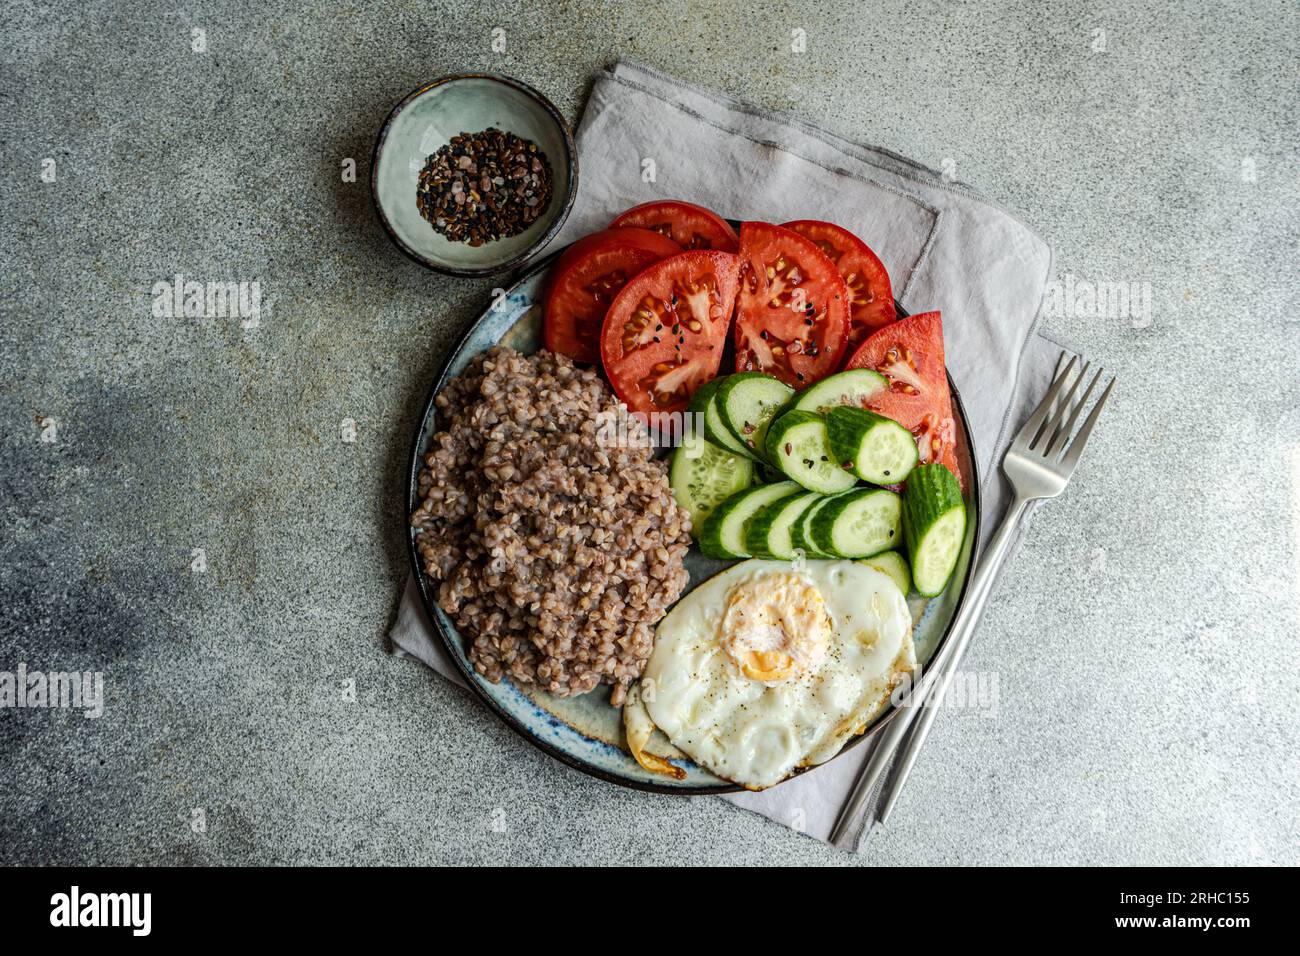 Overhead view of a healthy lunch plate with buckwheat, cucumber, tomato and a fried egg Stock Photo